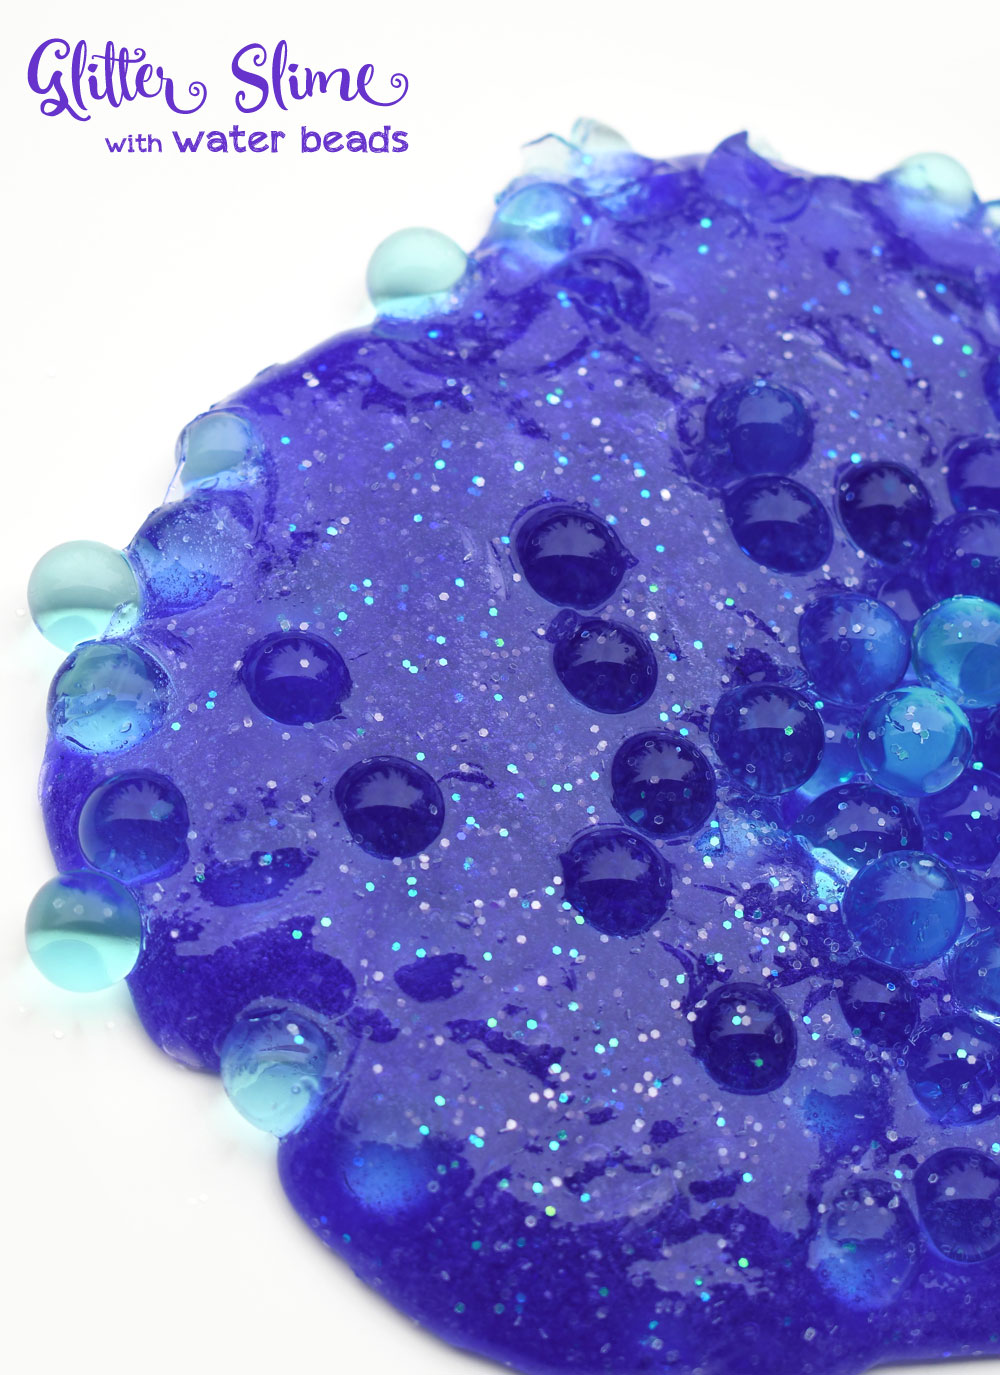 Make homemade slime with water beads mixed in